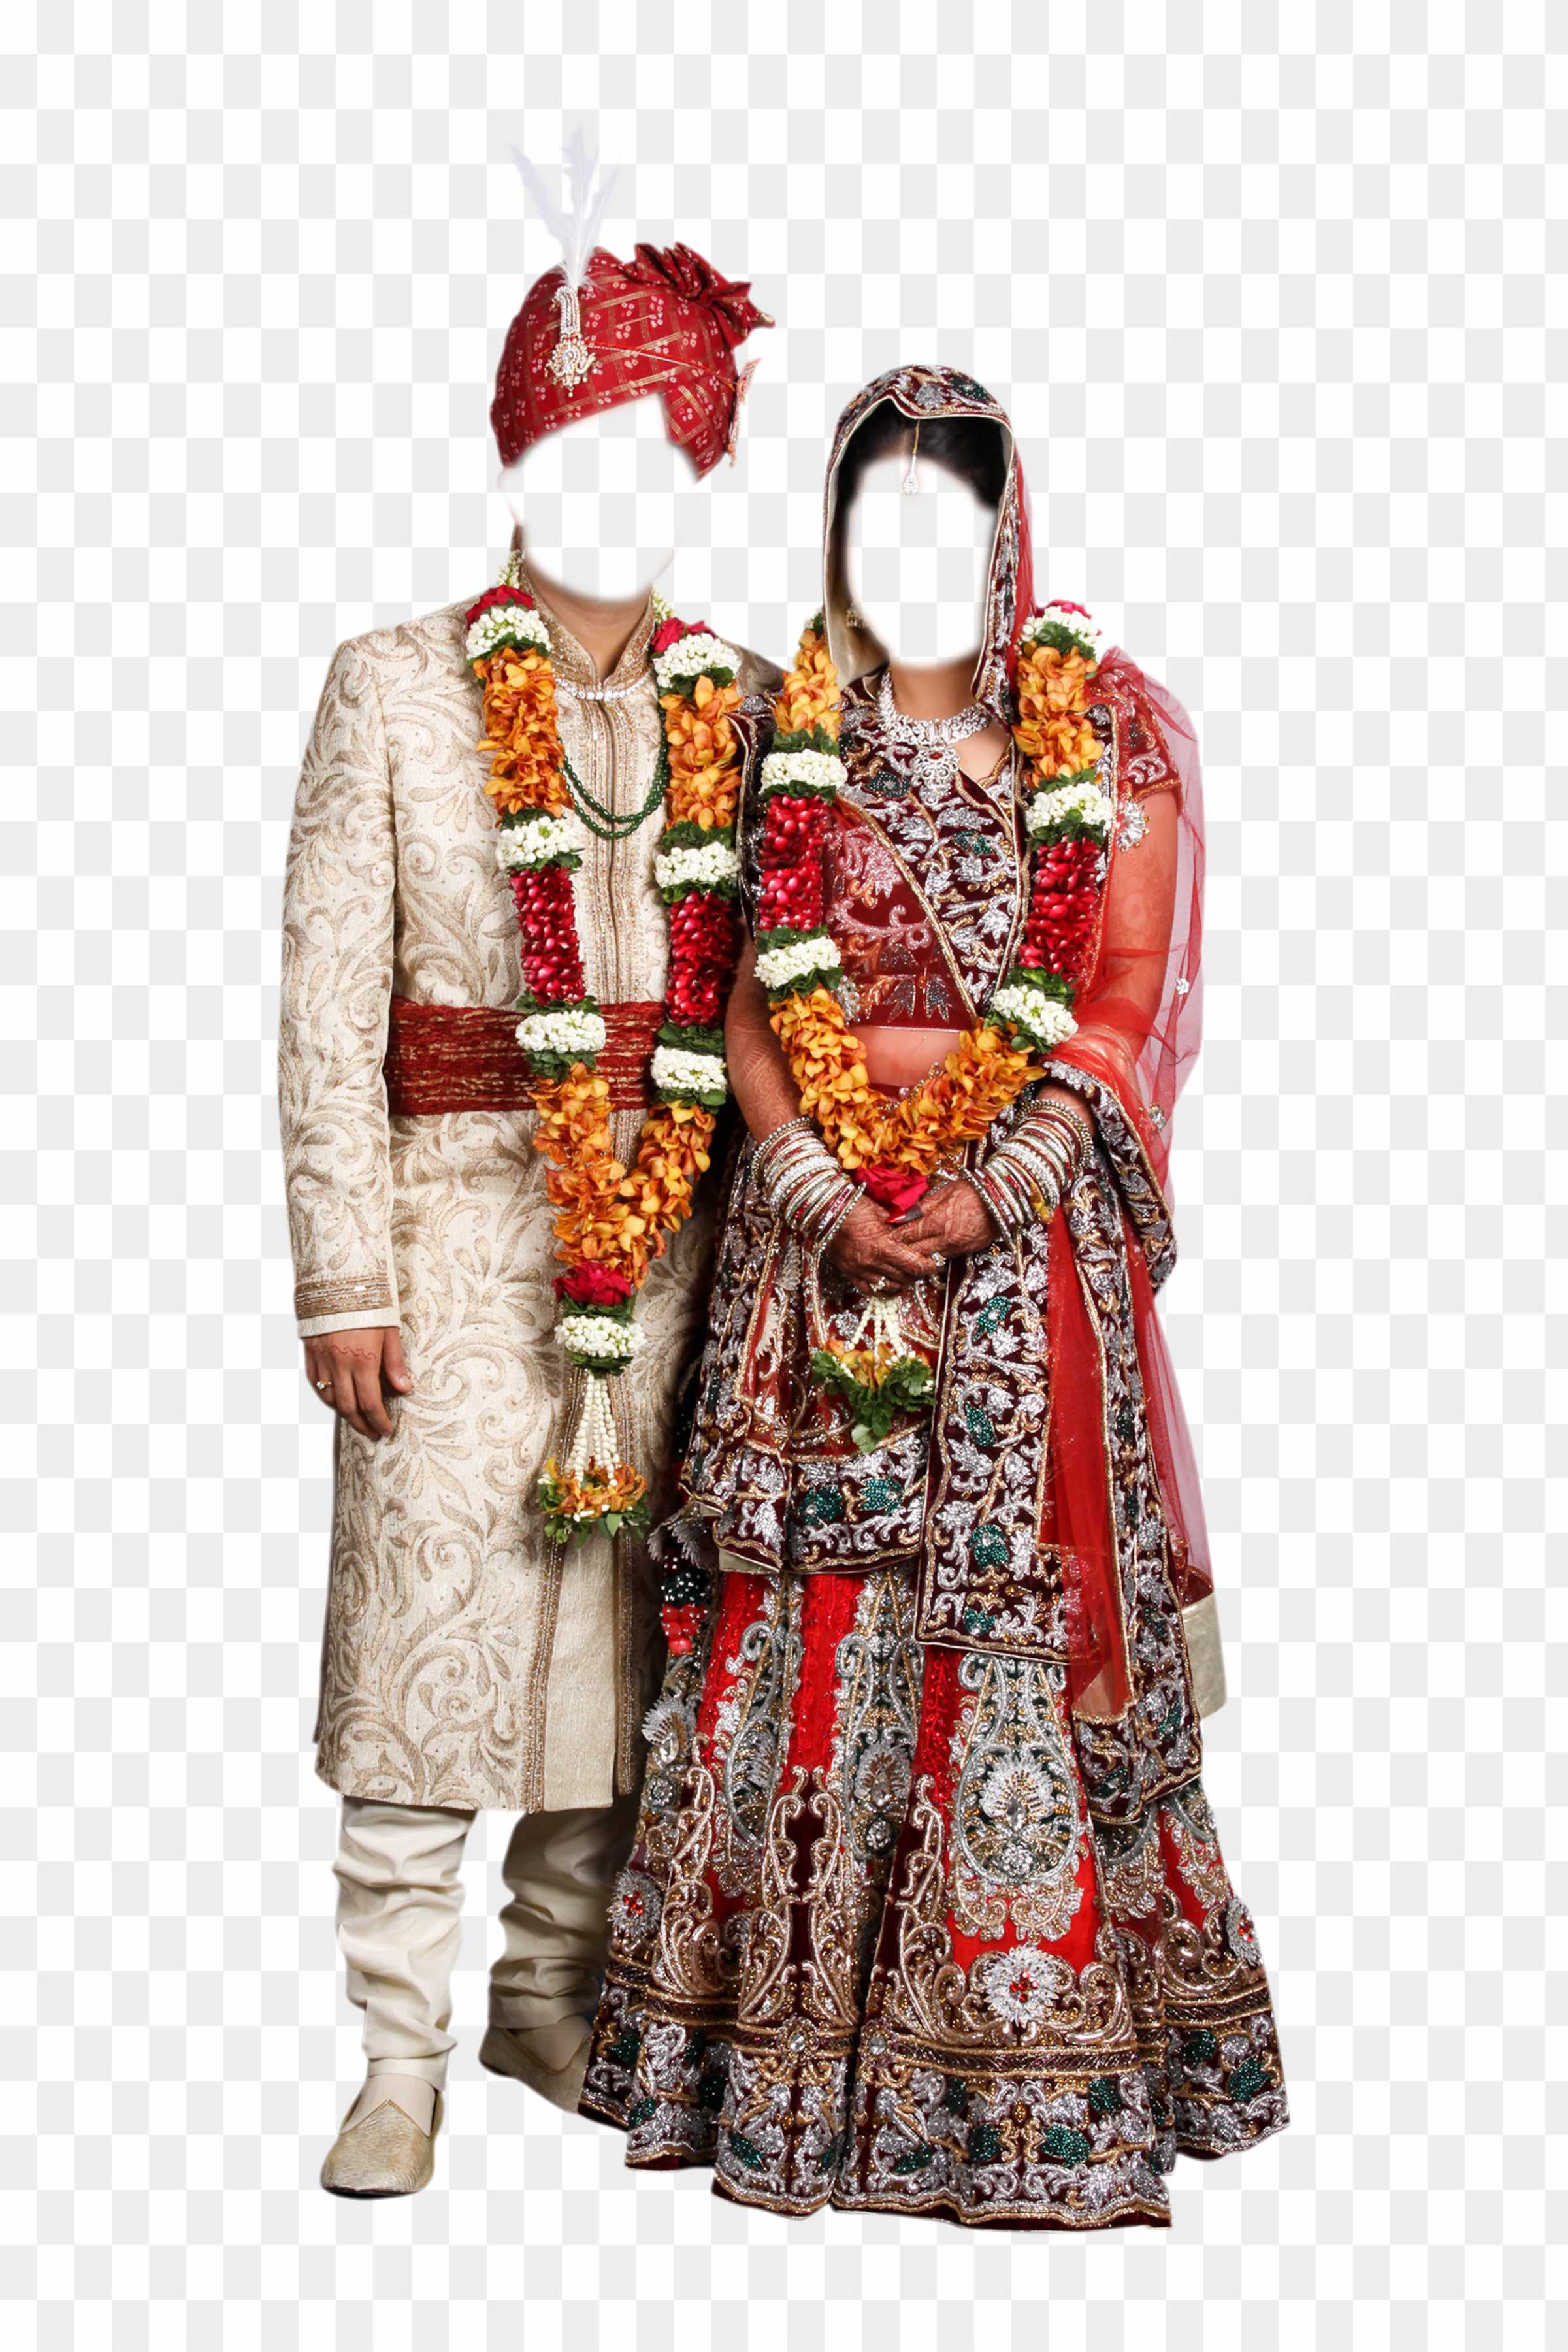 Bride and groom,Couple,Wedding dress,Dress,Women,Man,Married couple,Traditional  culture,Indian culture,Hinduism,Typical Indian Stock Photo - Alamy